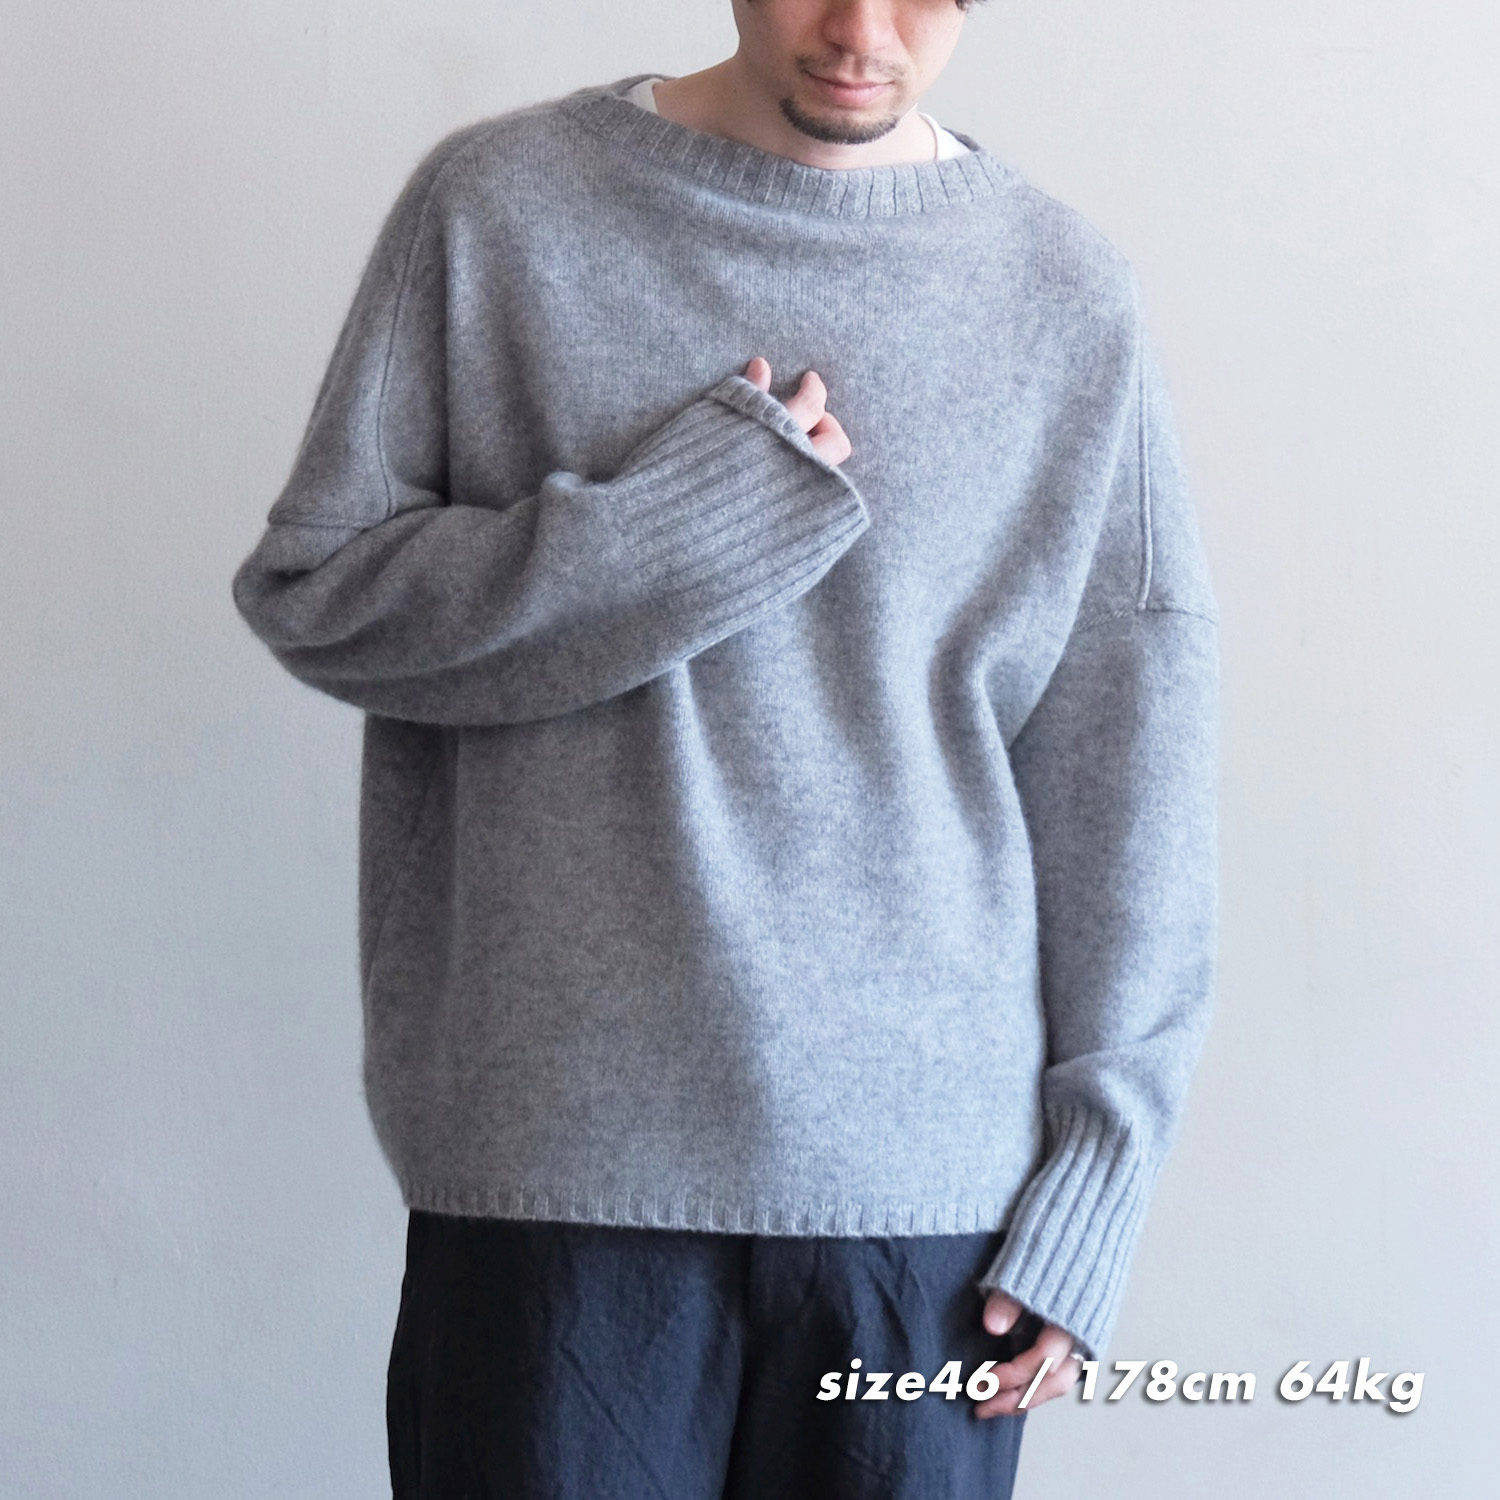 YAM CASHMERE LINEUP | WUNDER